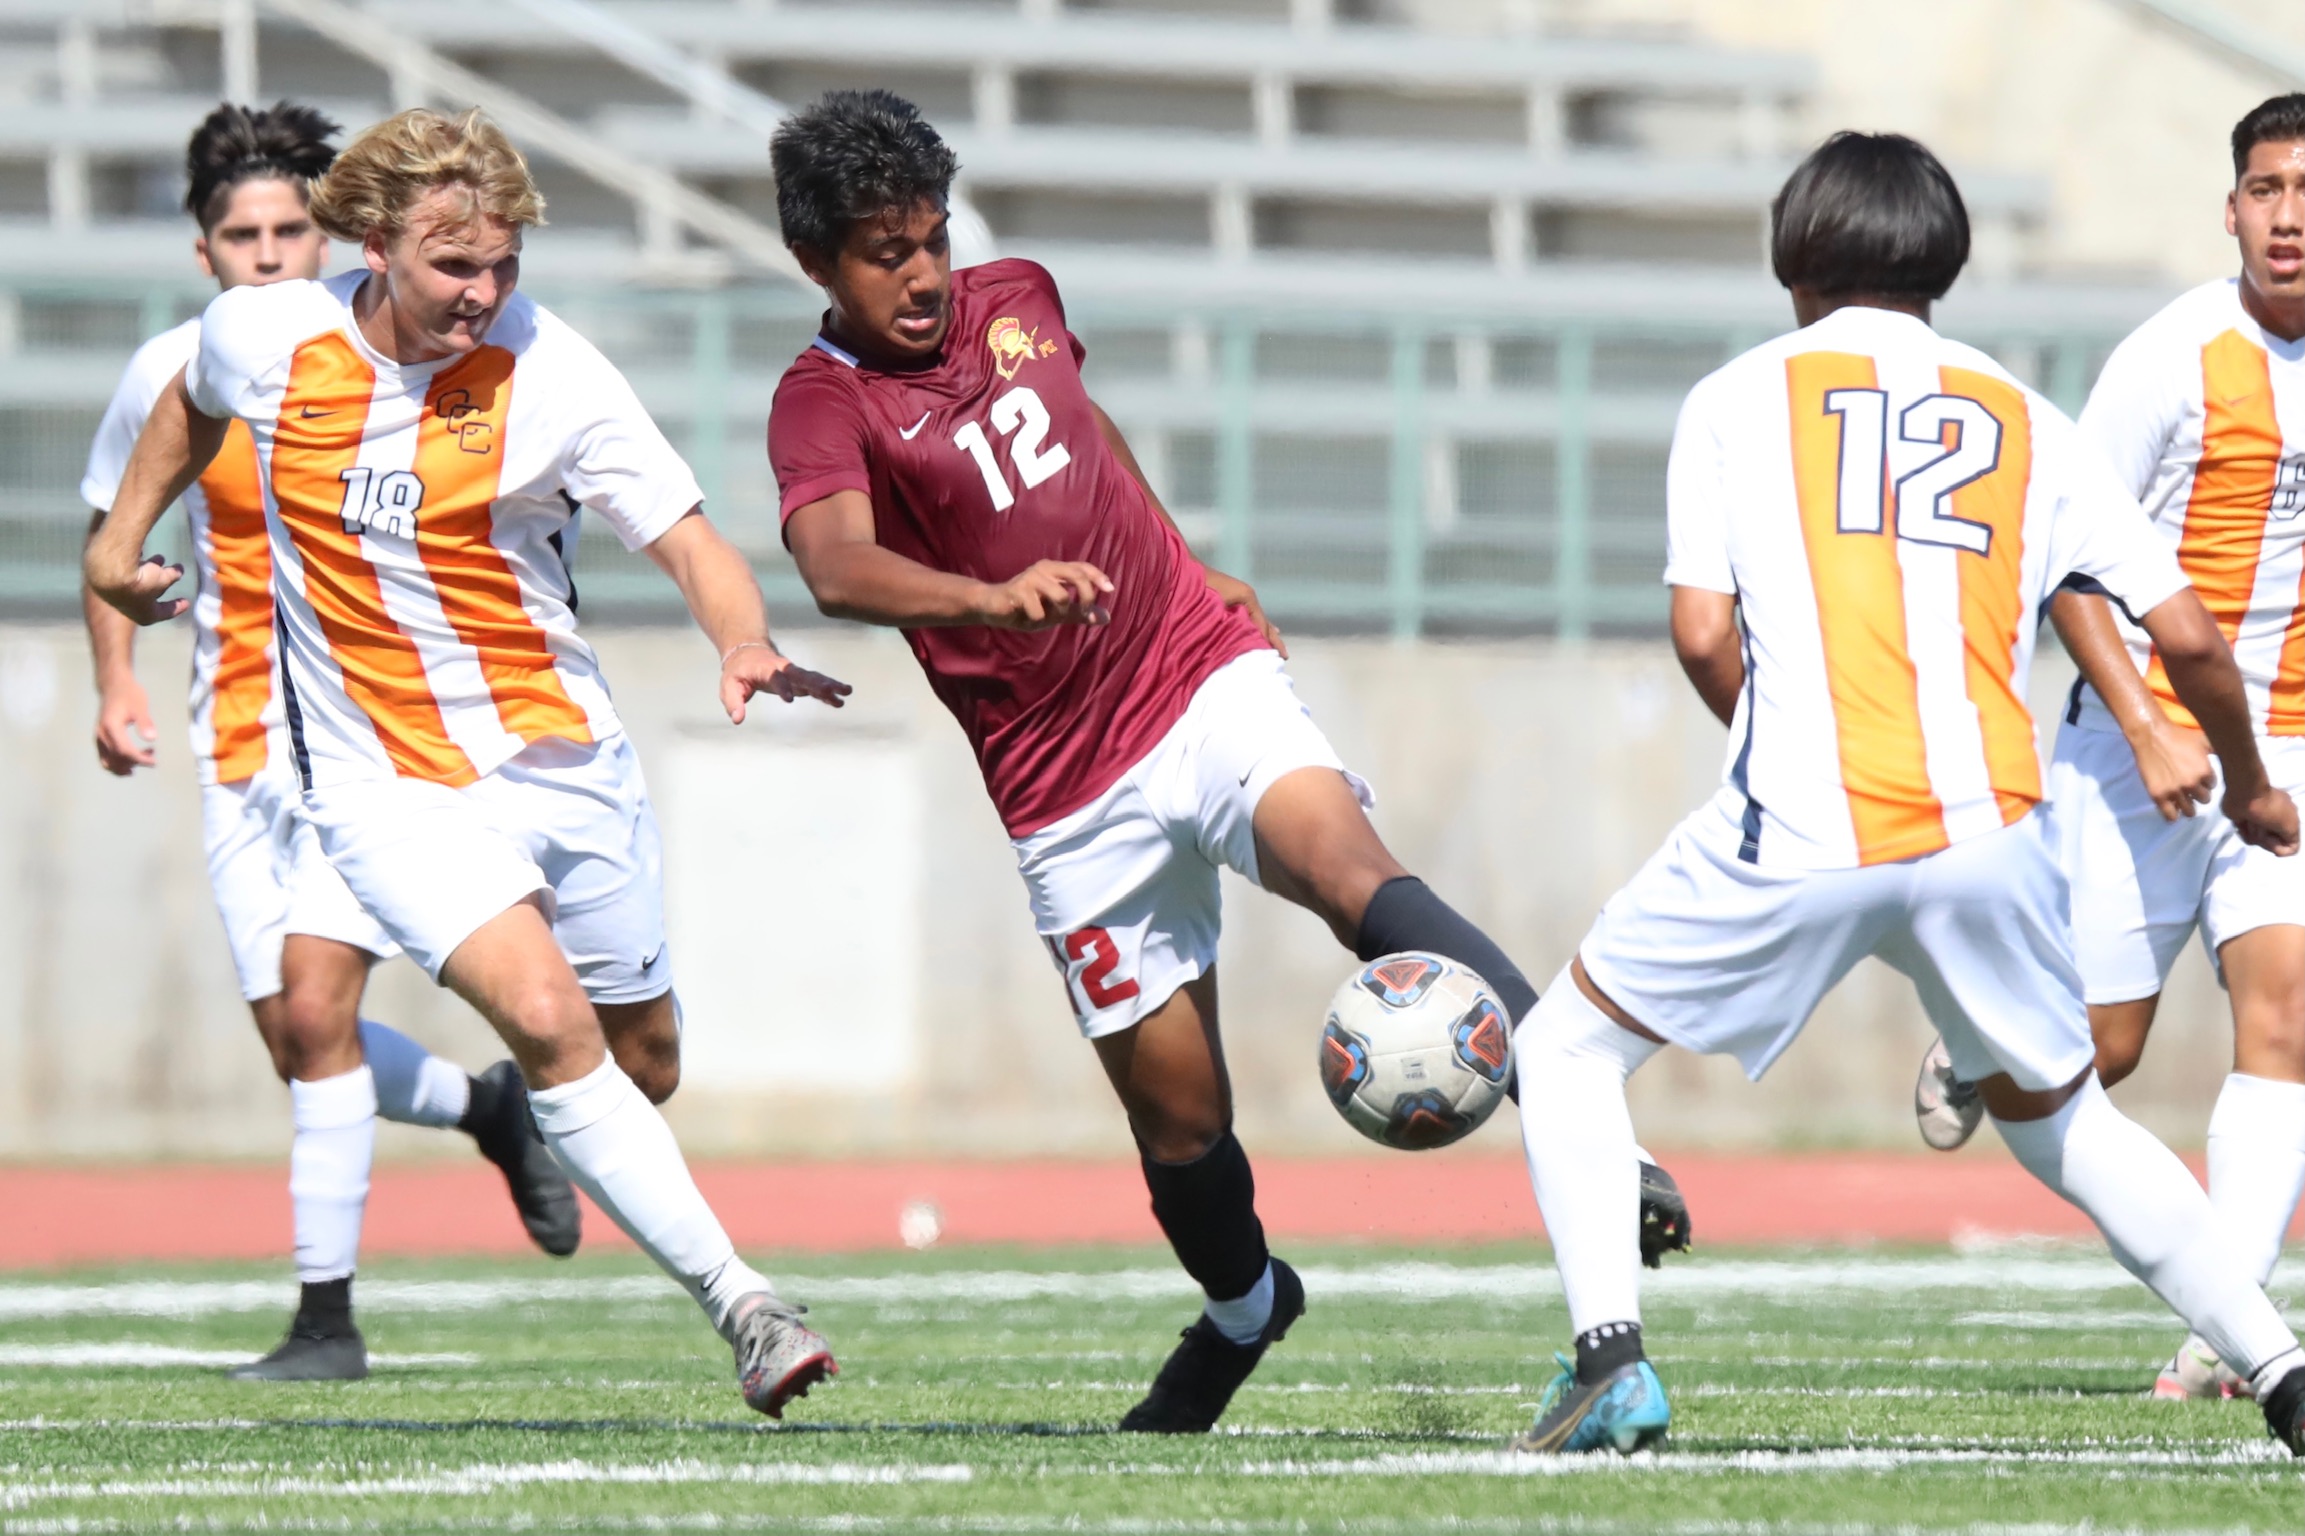 Elias Galaviz (12) plays a ball in a recent home game (photo by Michael Watkins).